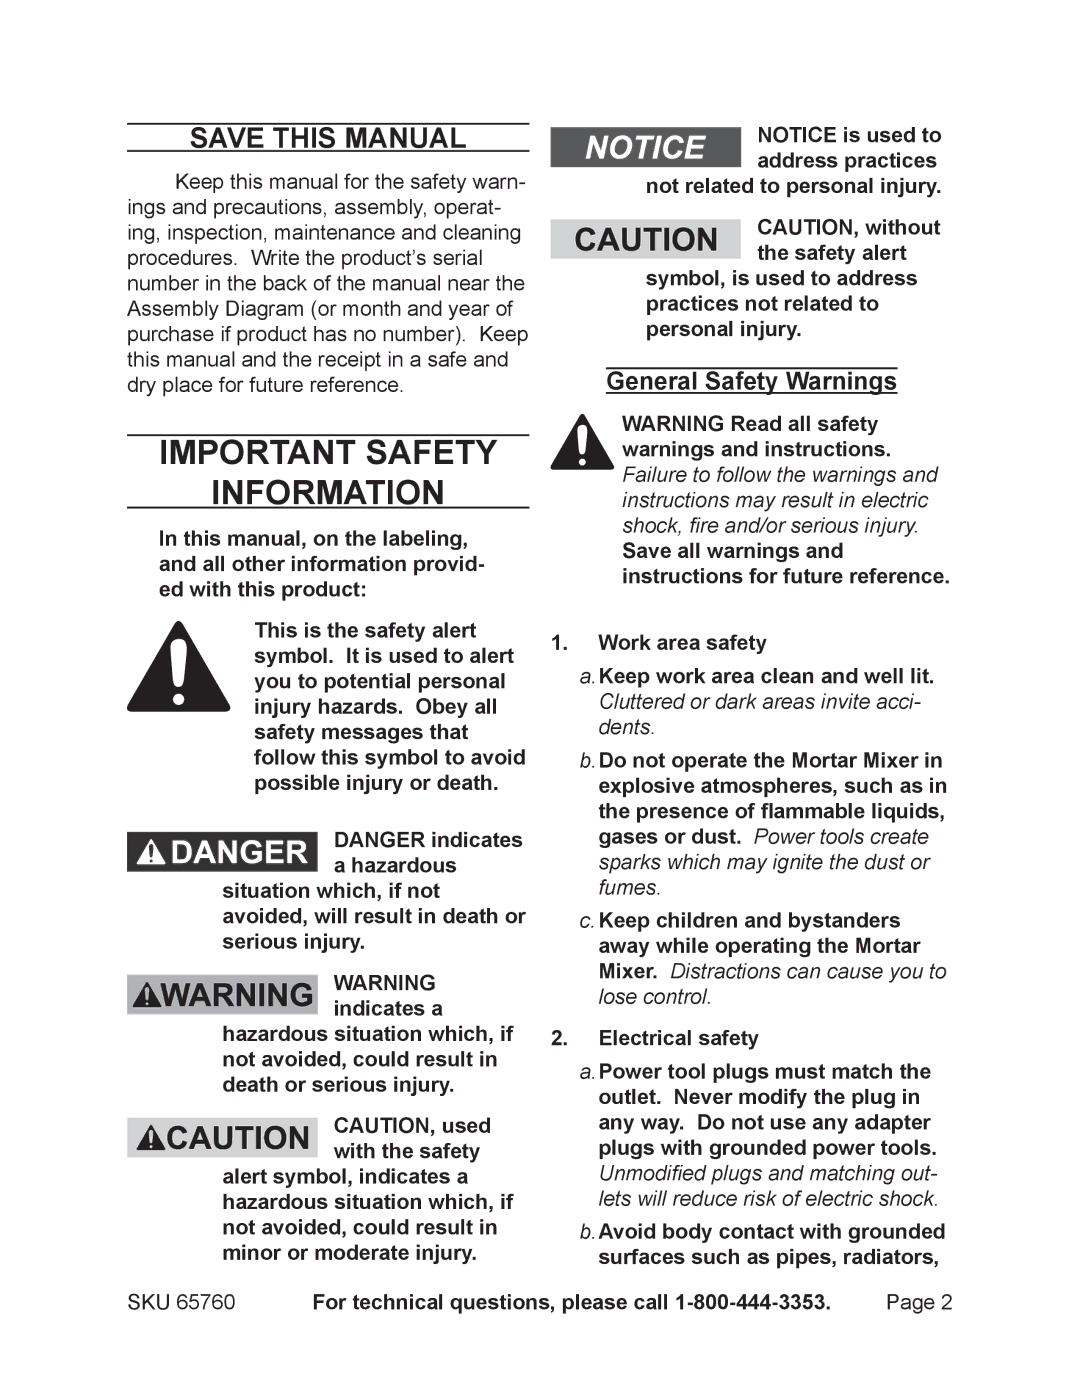 Chicago Electric 65760 manual Save This Manual, General Safety Warnings 